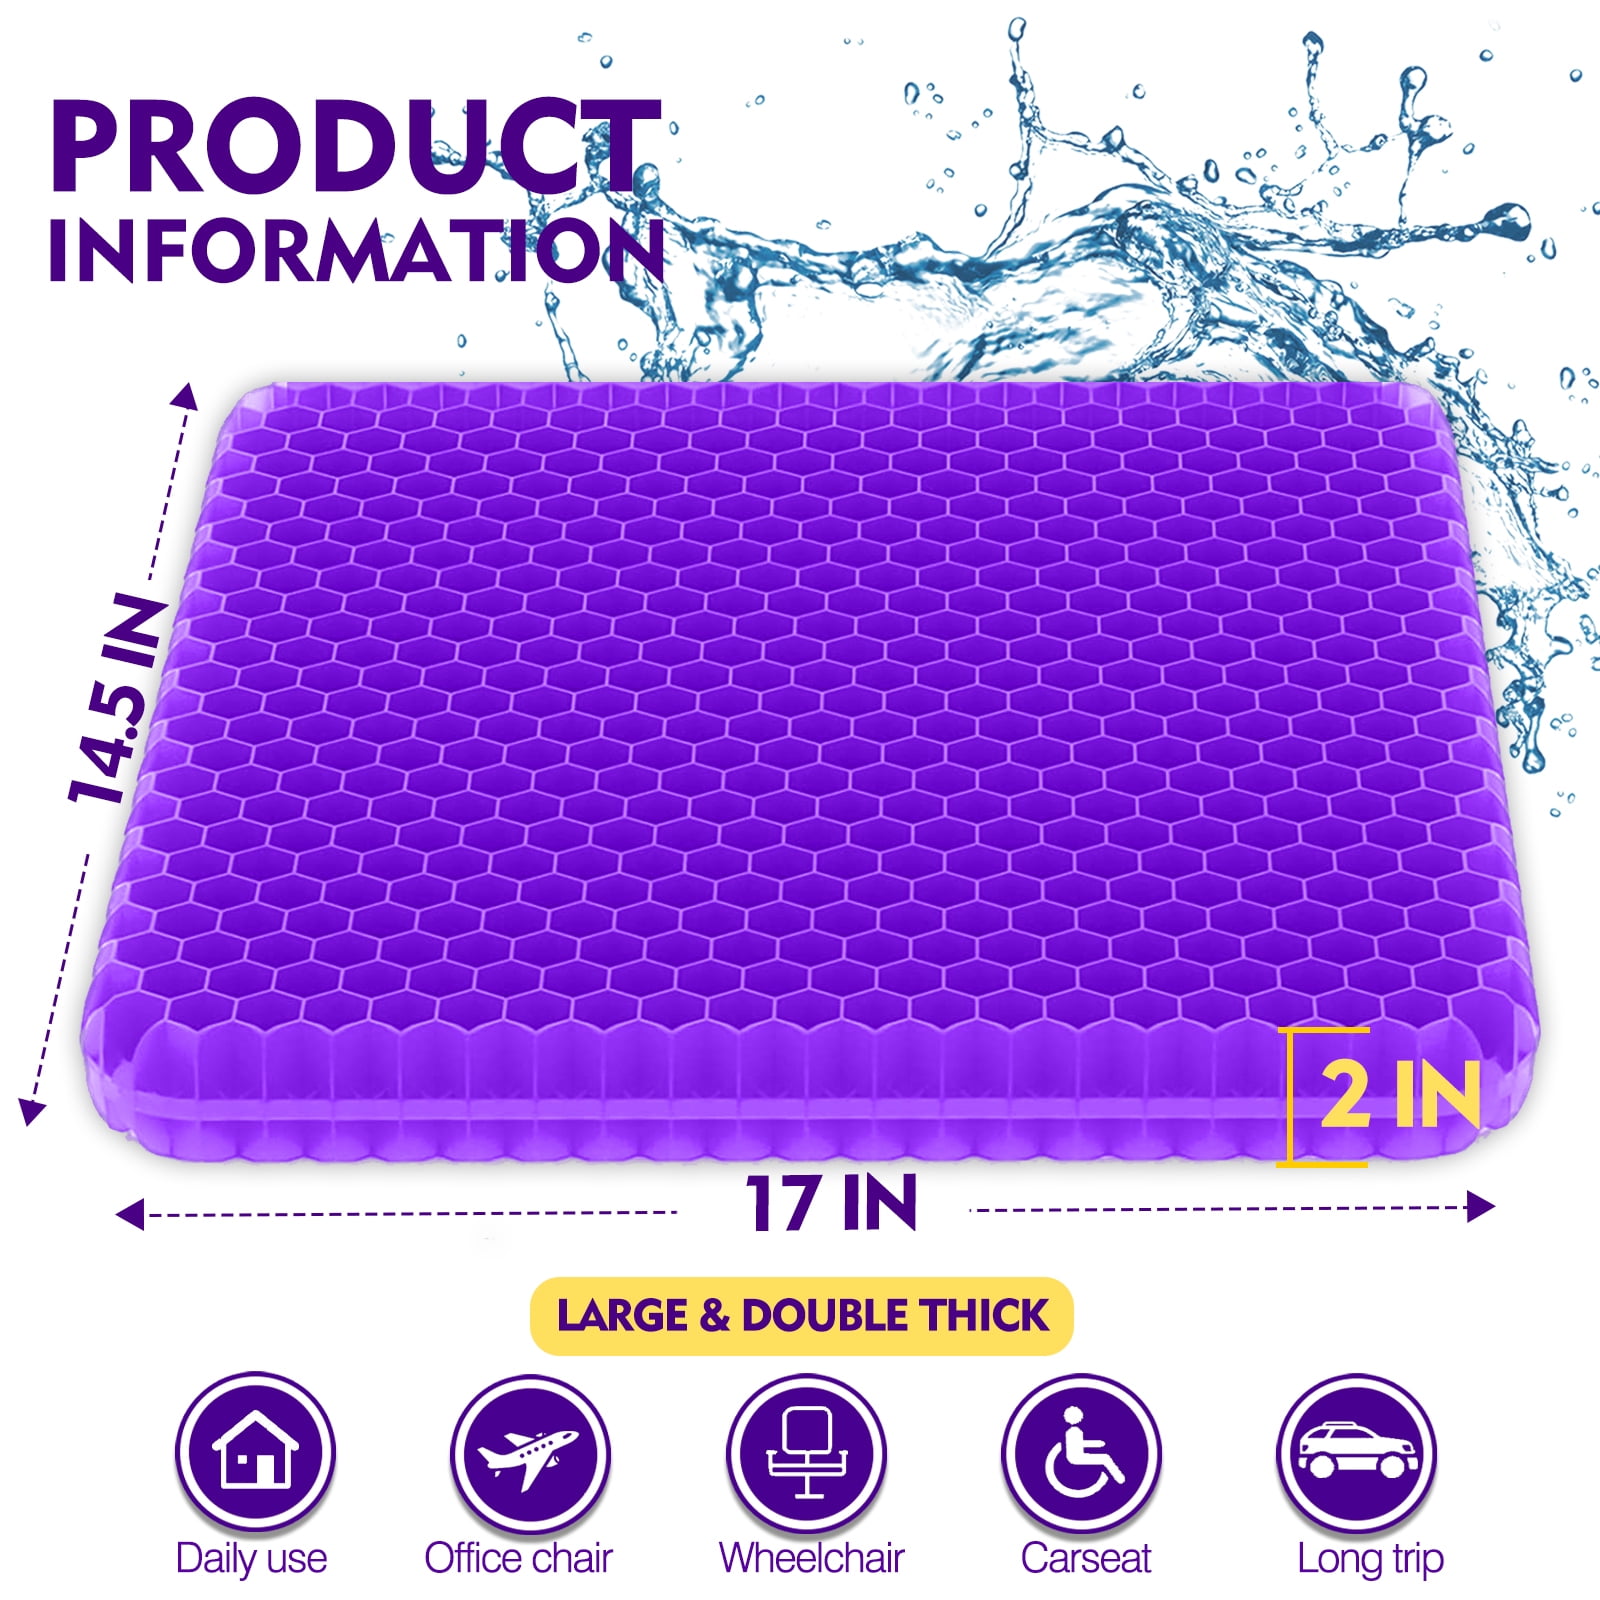 SATURAY Extra Large & Thick 19.5 Gel Cushion for Guinea